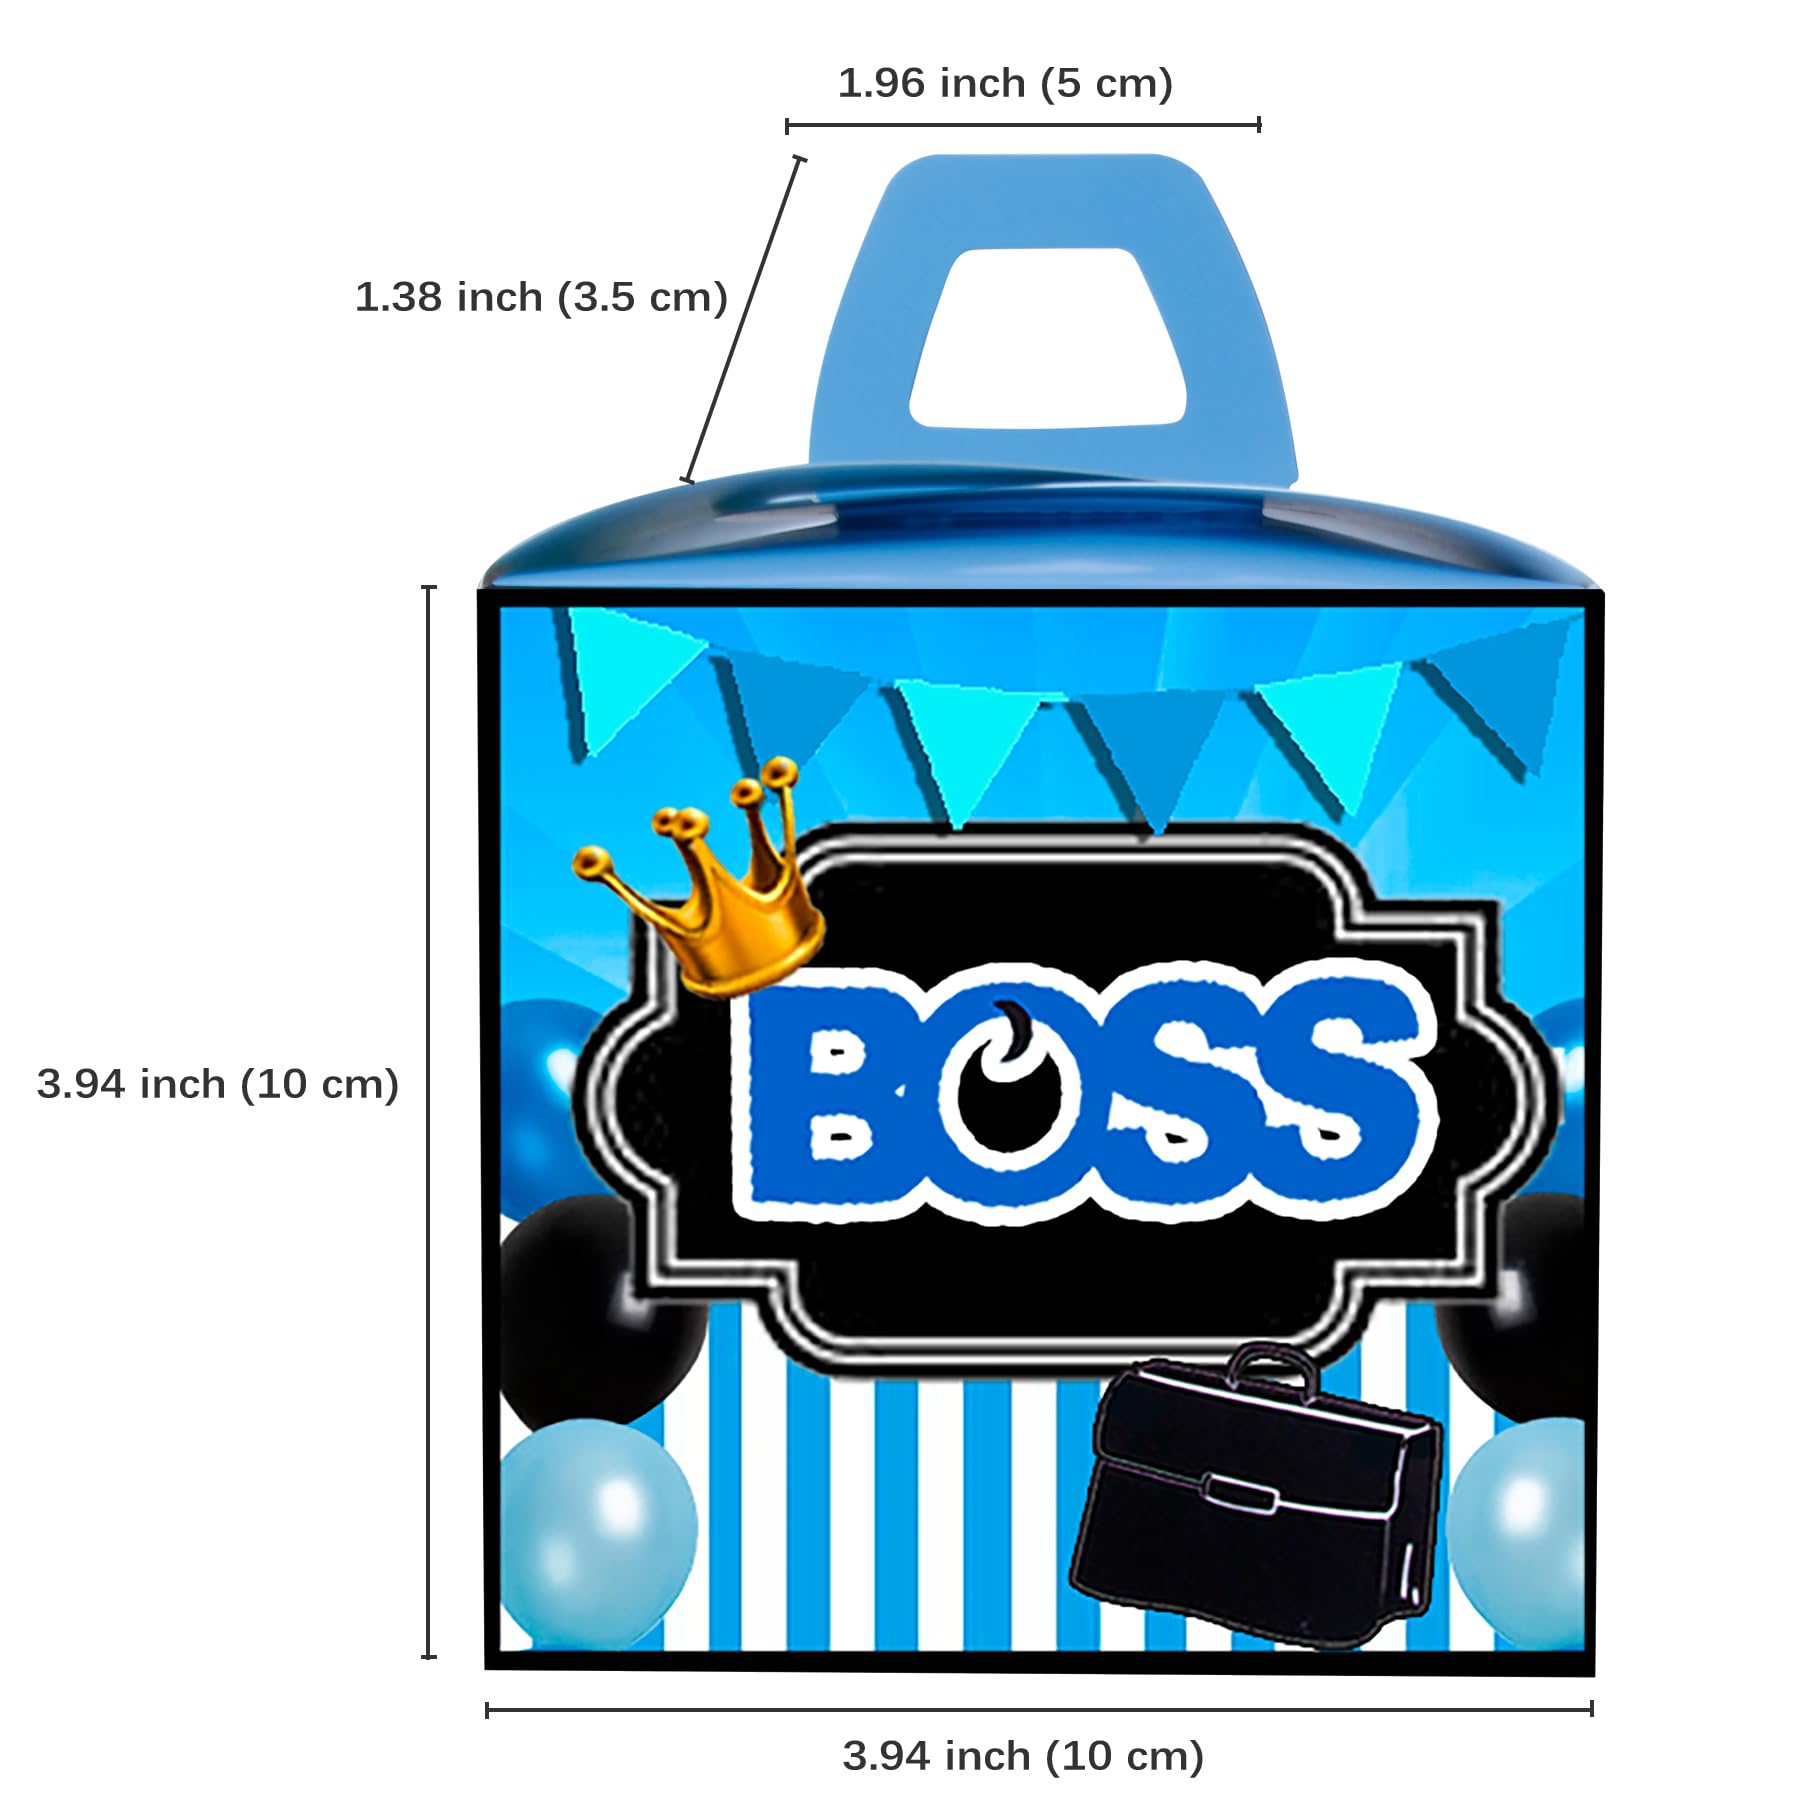 HAPPARTY BOSS Party Favor Boxes 24 PCS,Blue BOSS Boy BABY Gift goodie boxes, boss birthday favor candy treat boxes, boss 1st 2nd birthday decorations, boss birthday party supplies